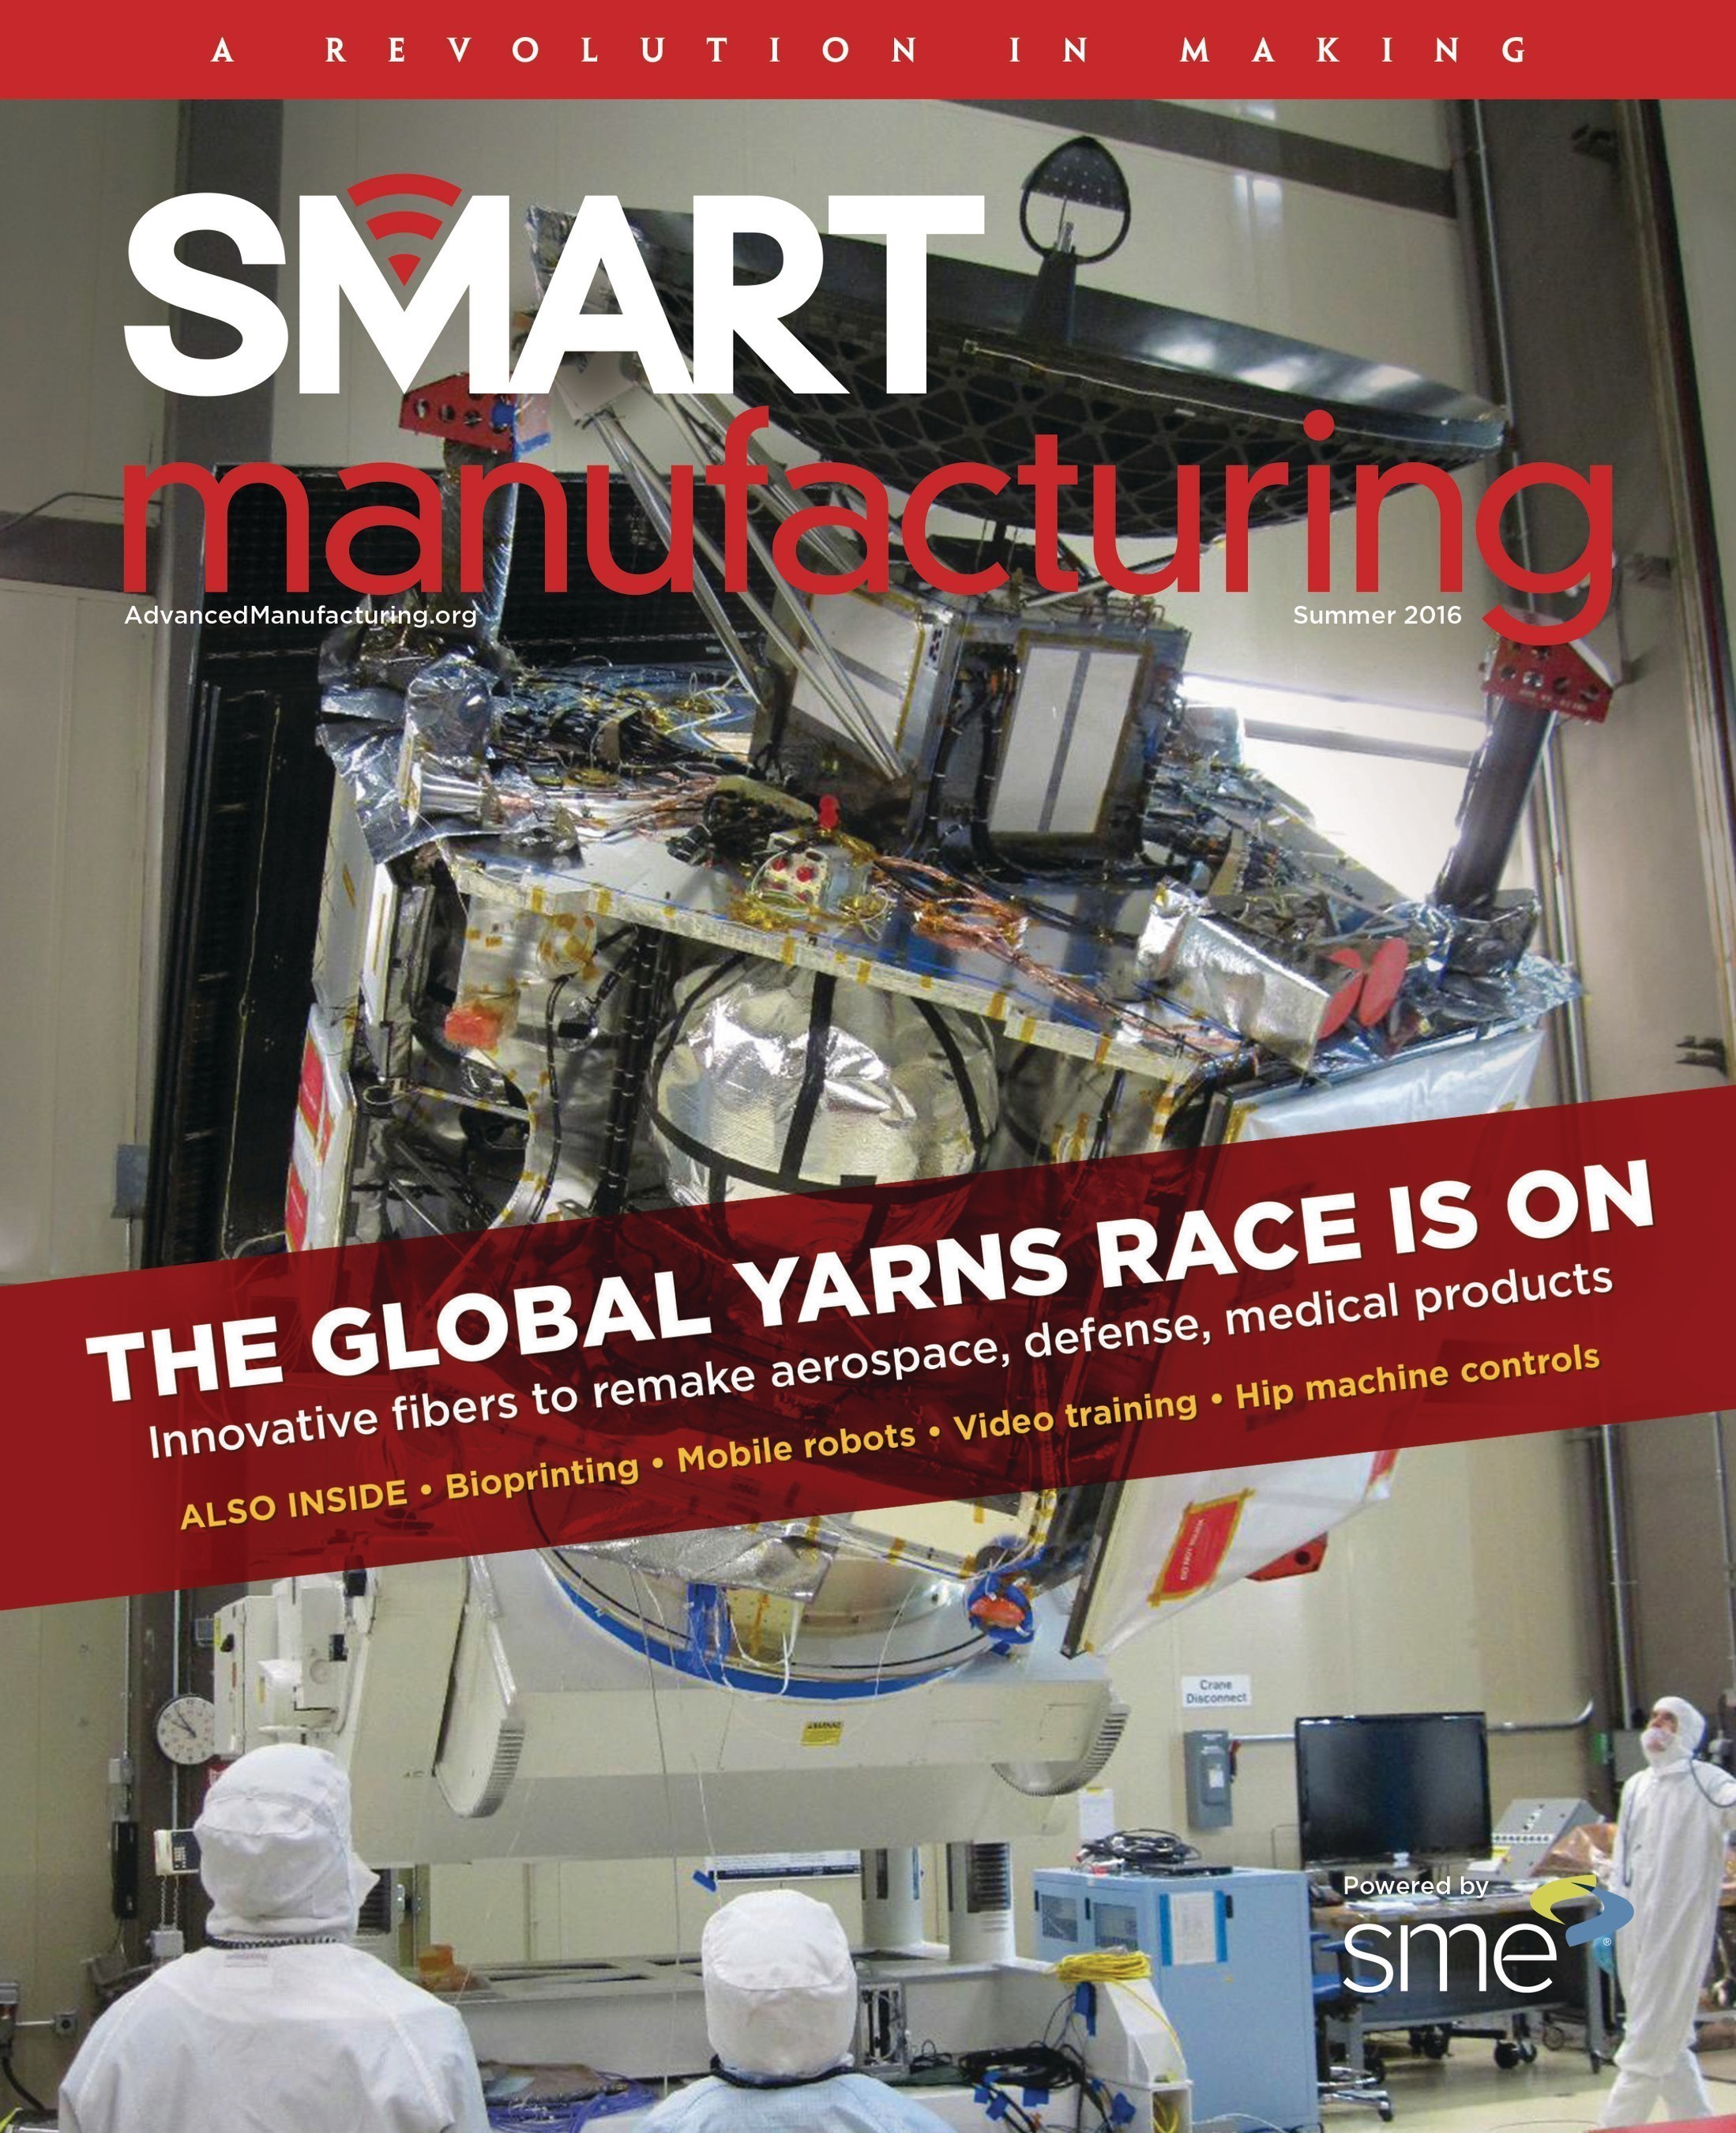 Smart Manufacturing, published quarterly by SME's Advanced Manufacturing Media, can be reviewed and downloaded at sme.org/smart